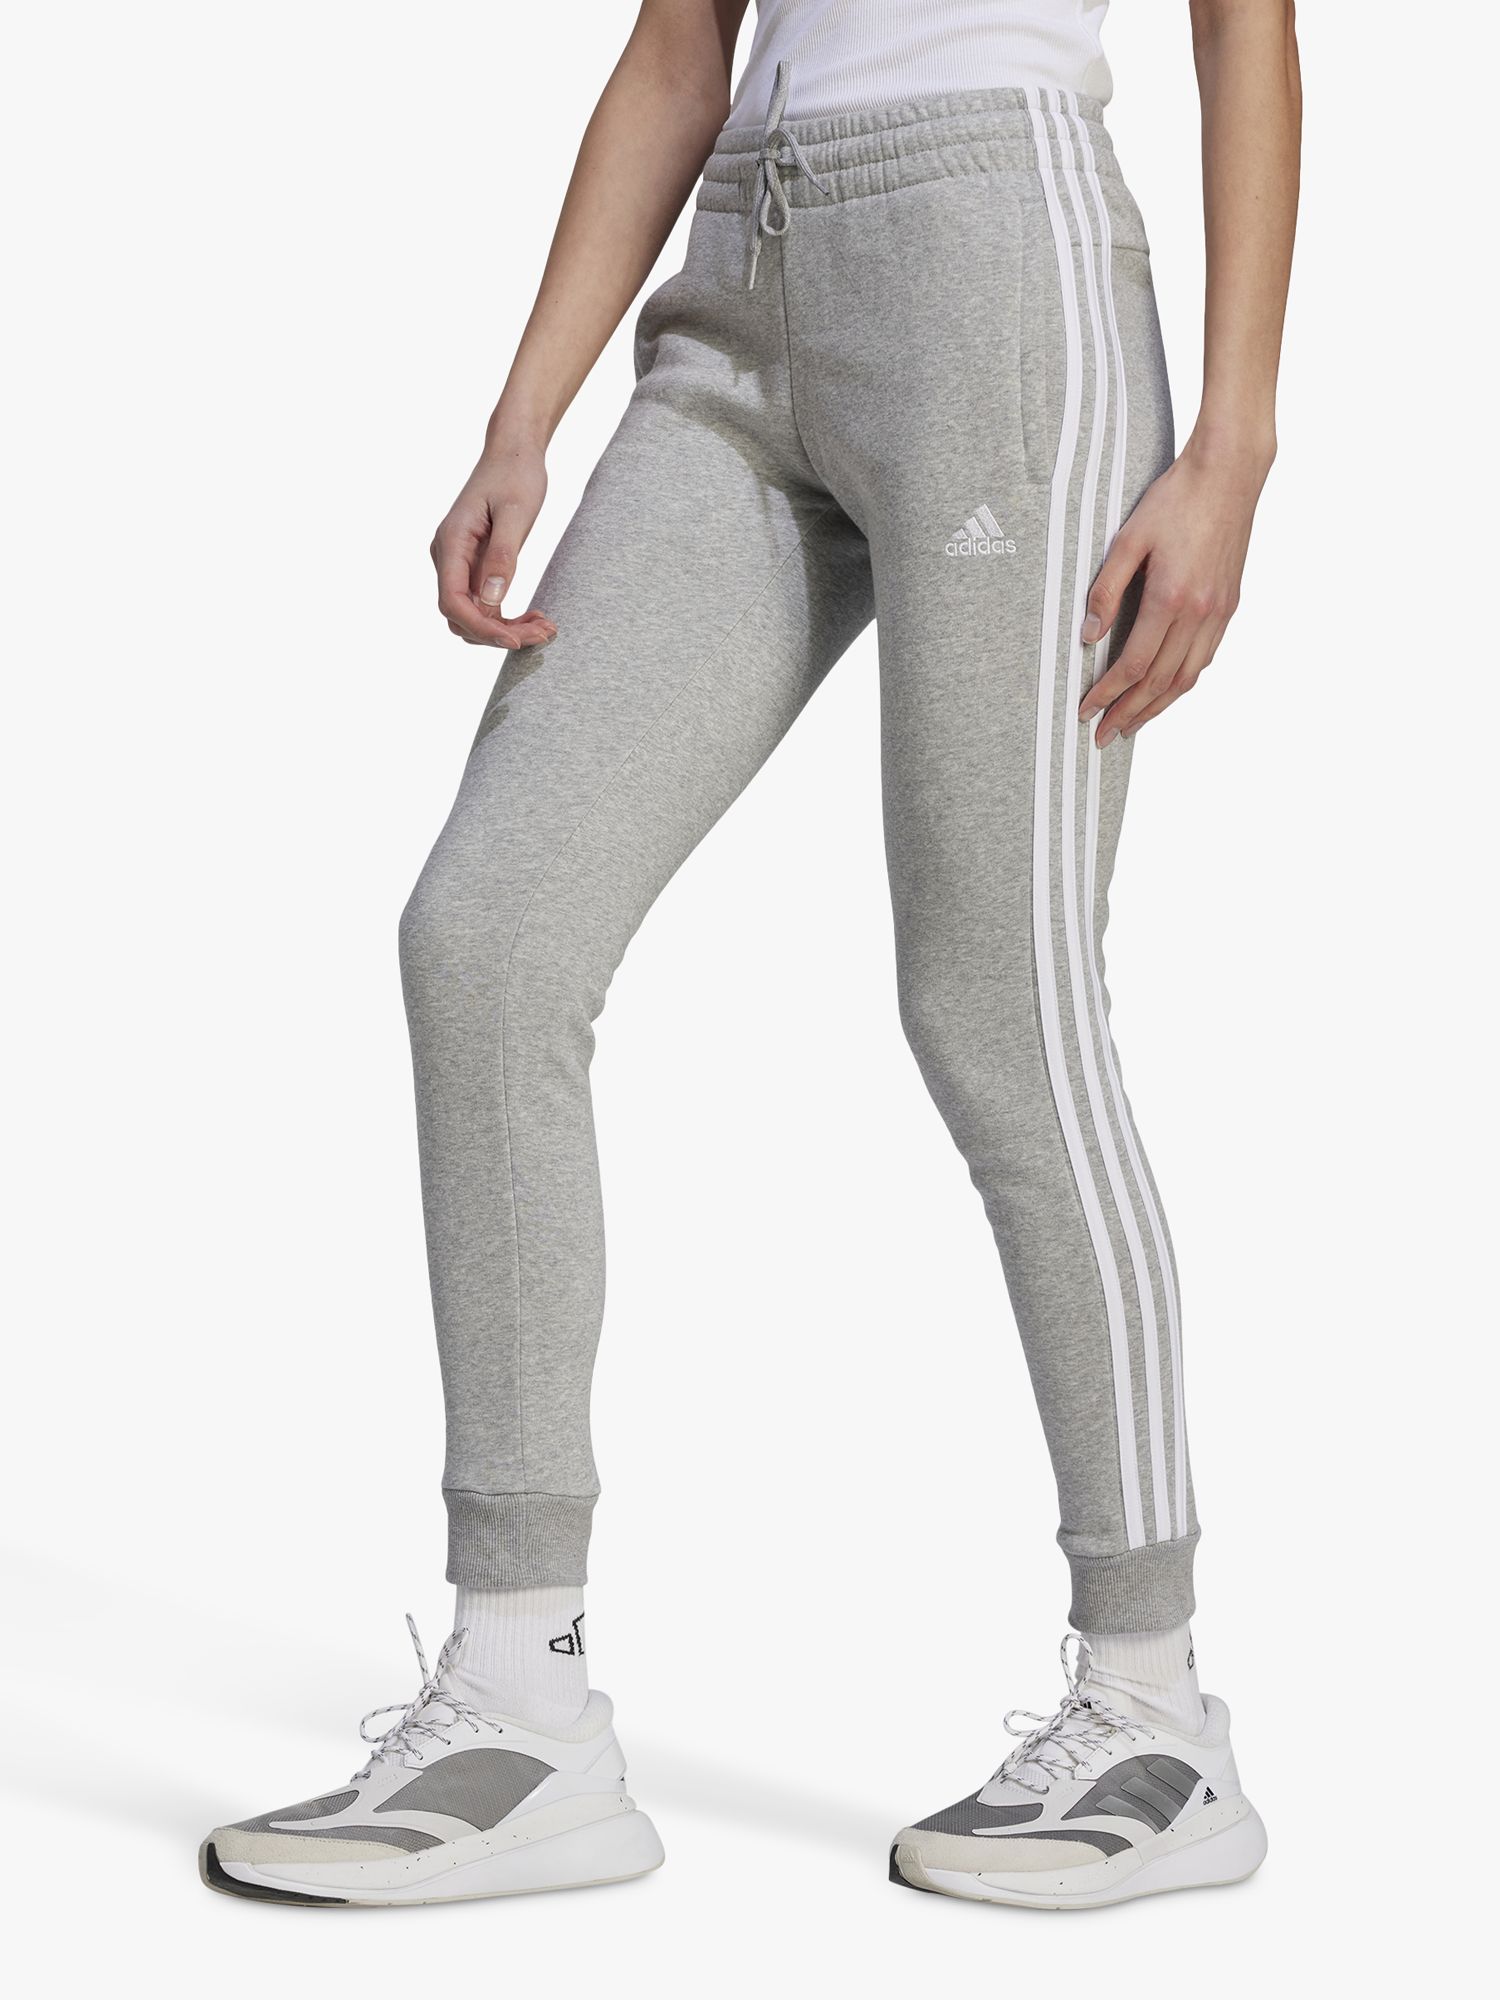 3 Stripes French Heather/White Terry & adidas Essentials at Lewis Joggers, Partners John Grey